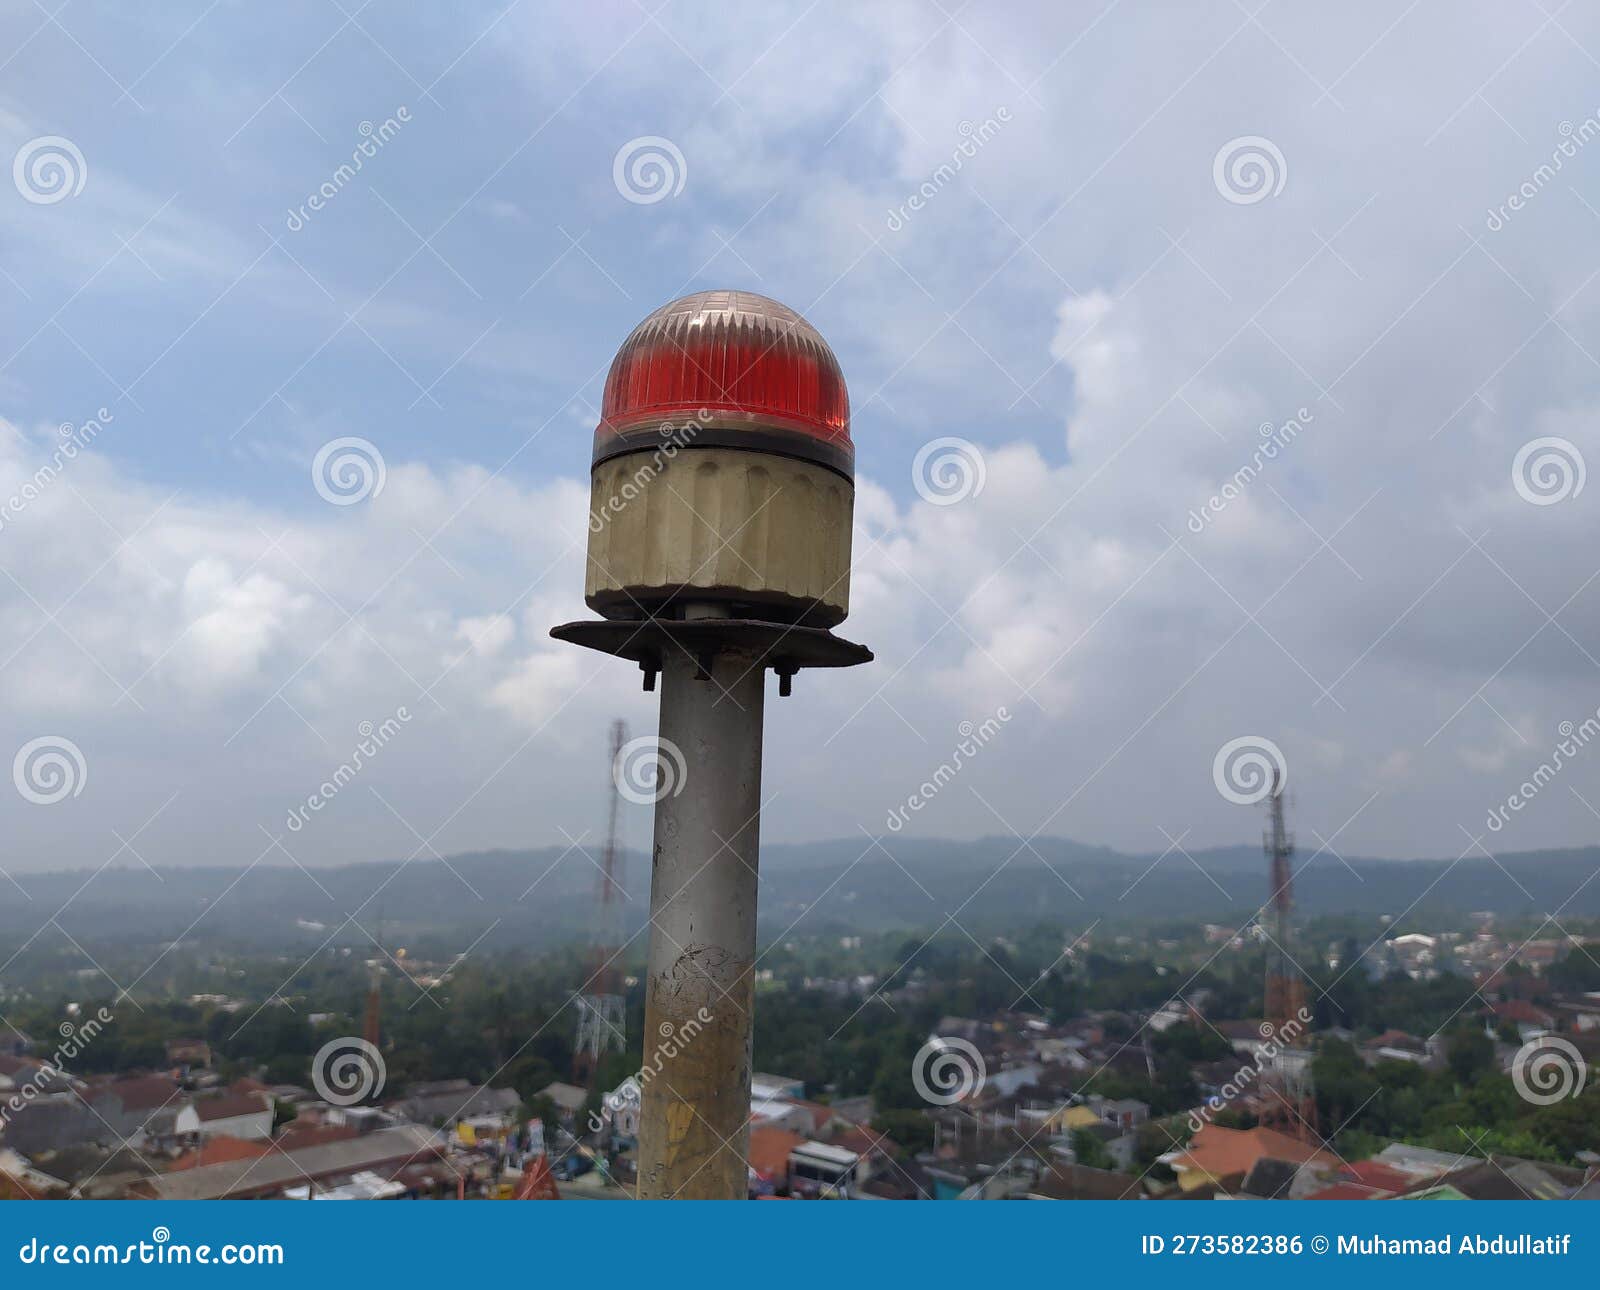 tower lights to detect the whereabouts of the tower remotely by airplane or helicopter pilots